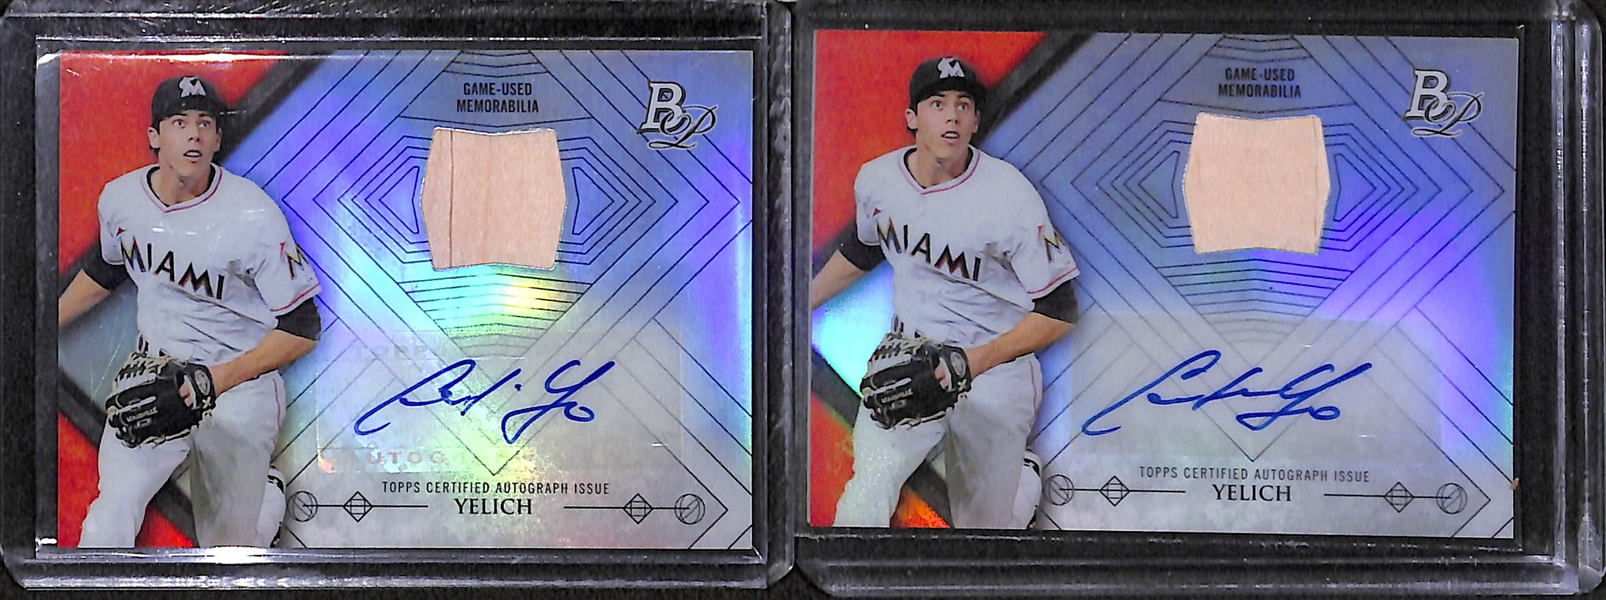 Lot Of 25 Baseball Autograph Cards w. Giolito & Yelich